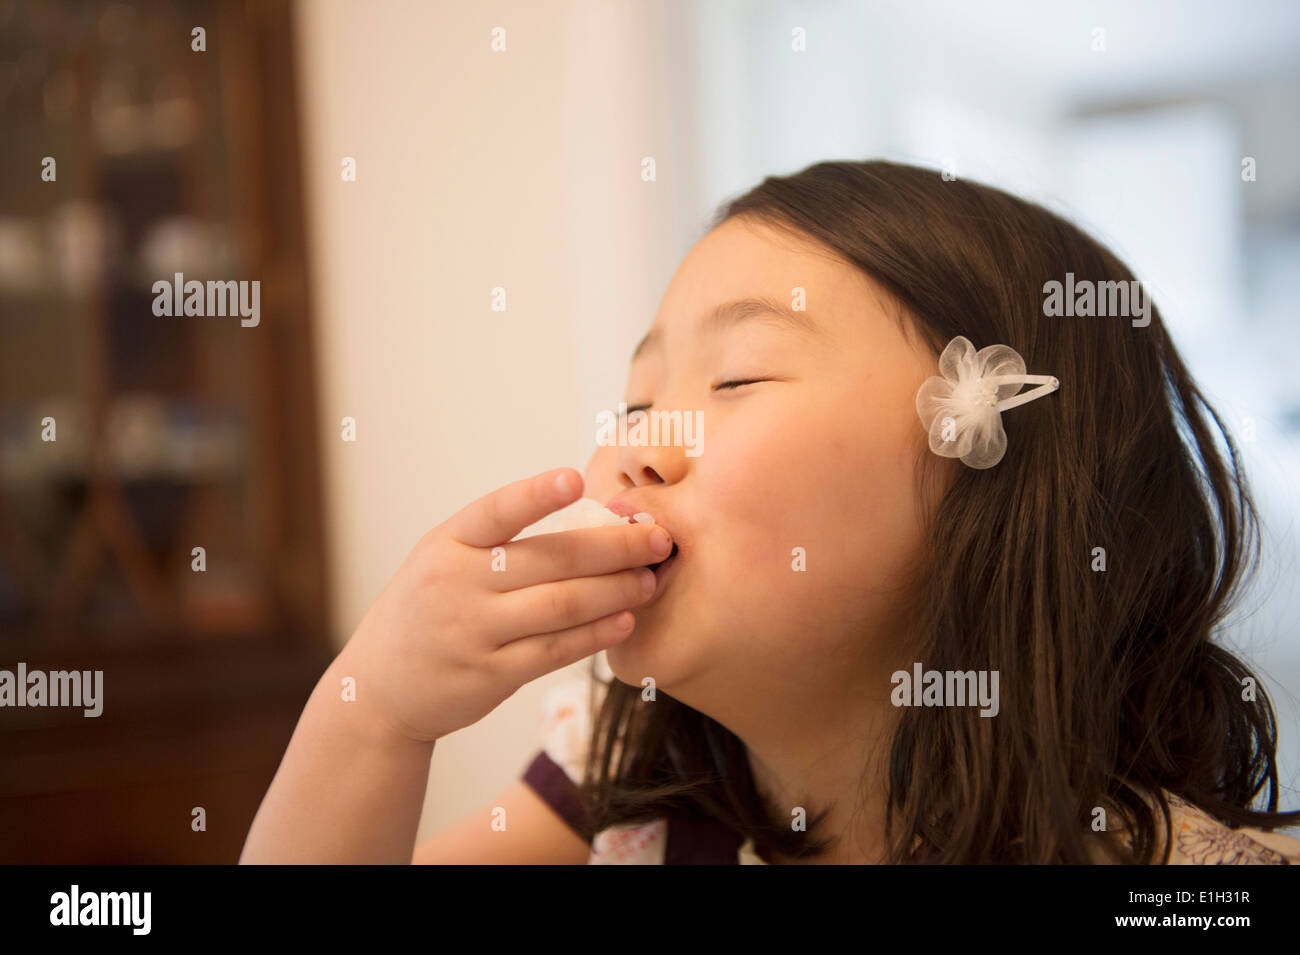 Young girl enjoying a snack Stock Photo